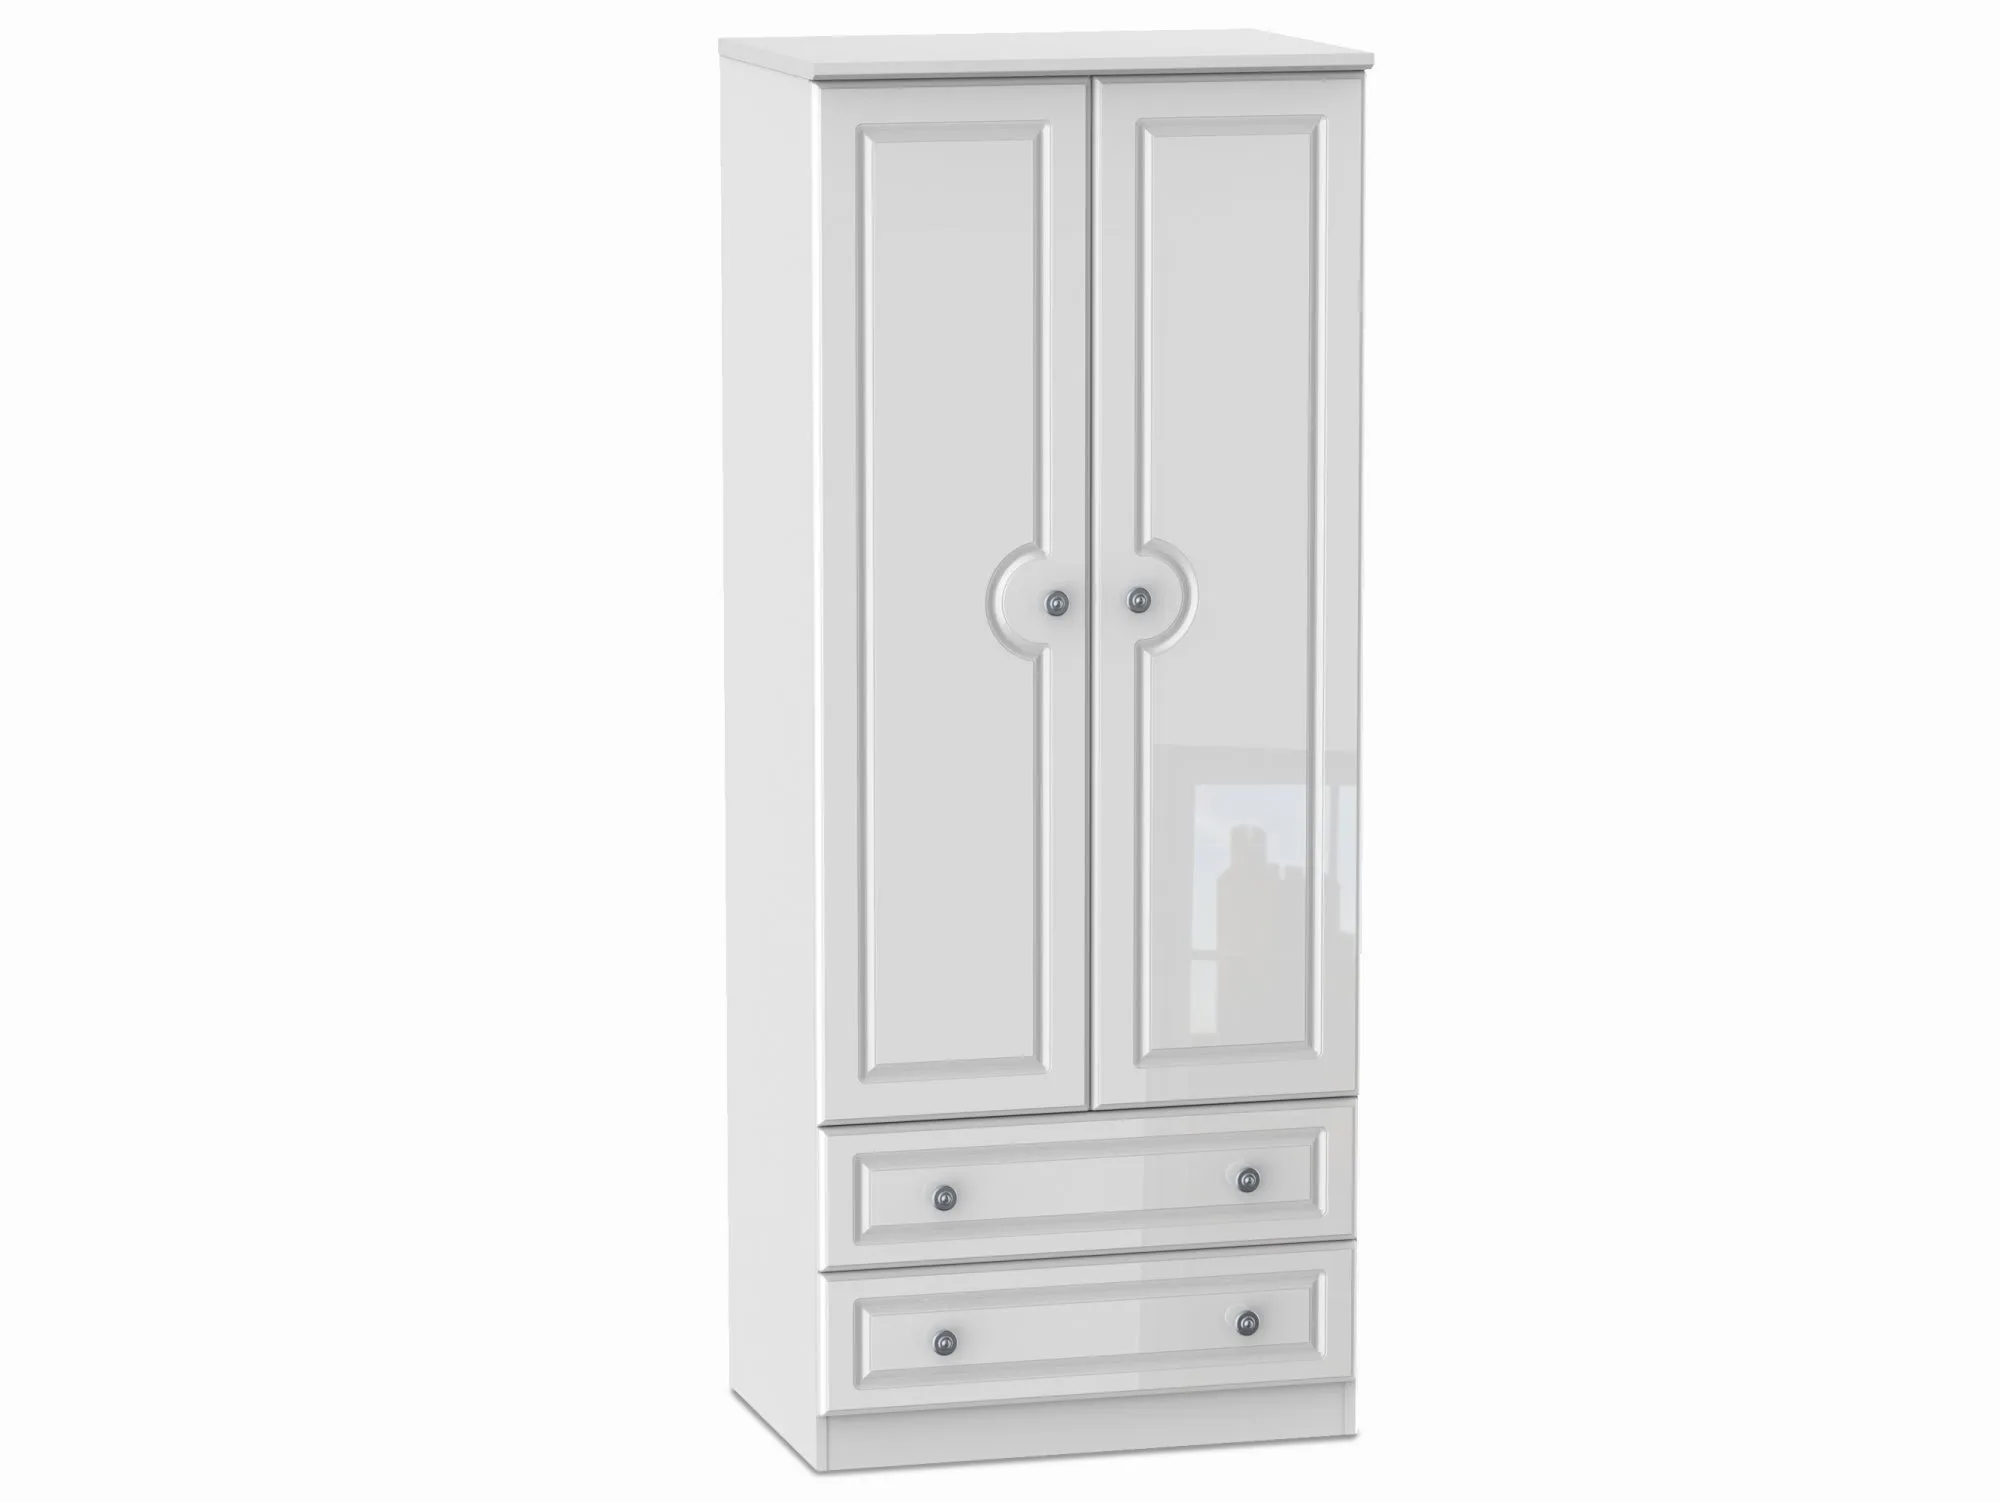 Welcome Welcome 2ft6 Pembroke White High Gloss 2 Door 2 Drawer Double Wardrobe (Assembled)